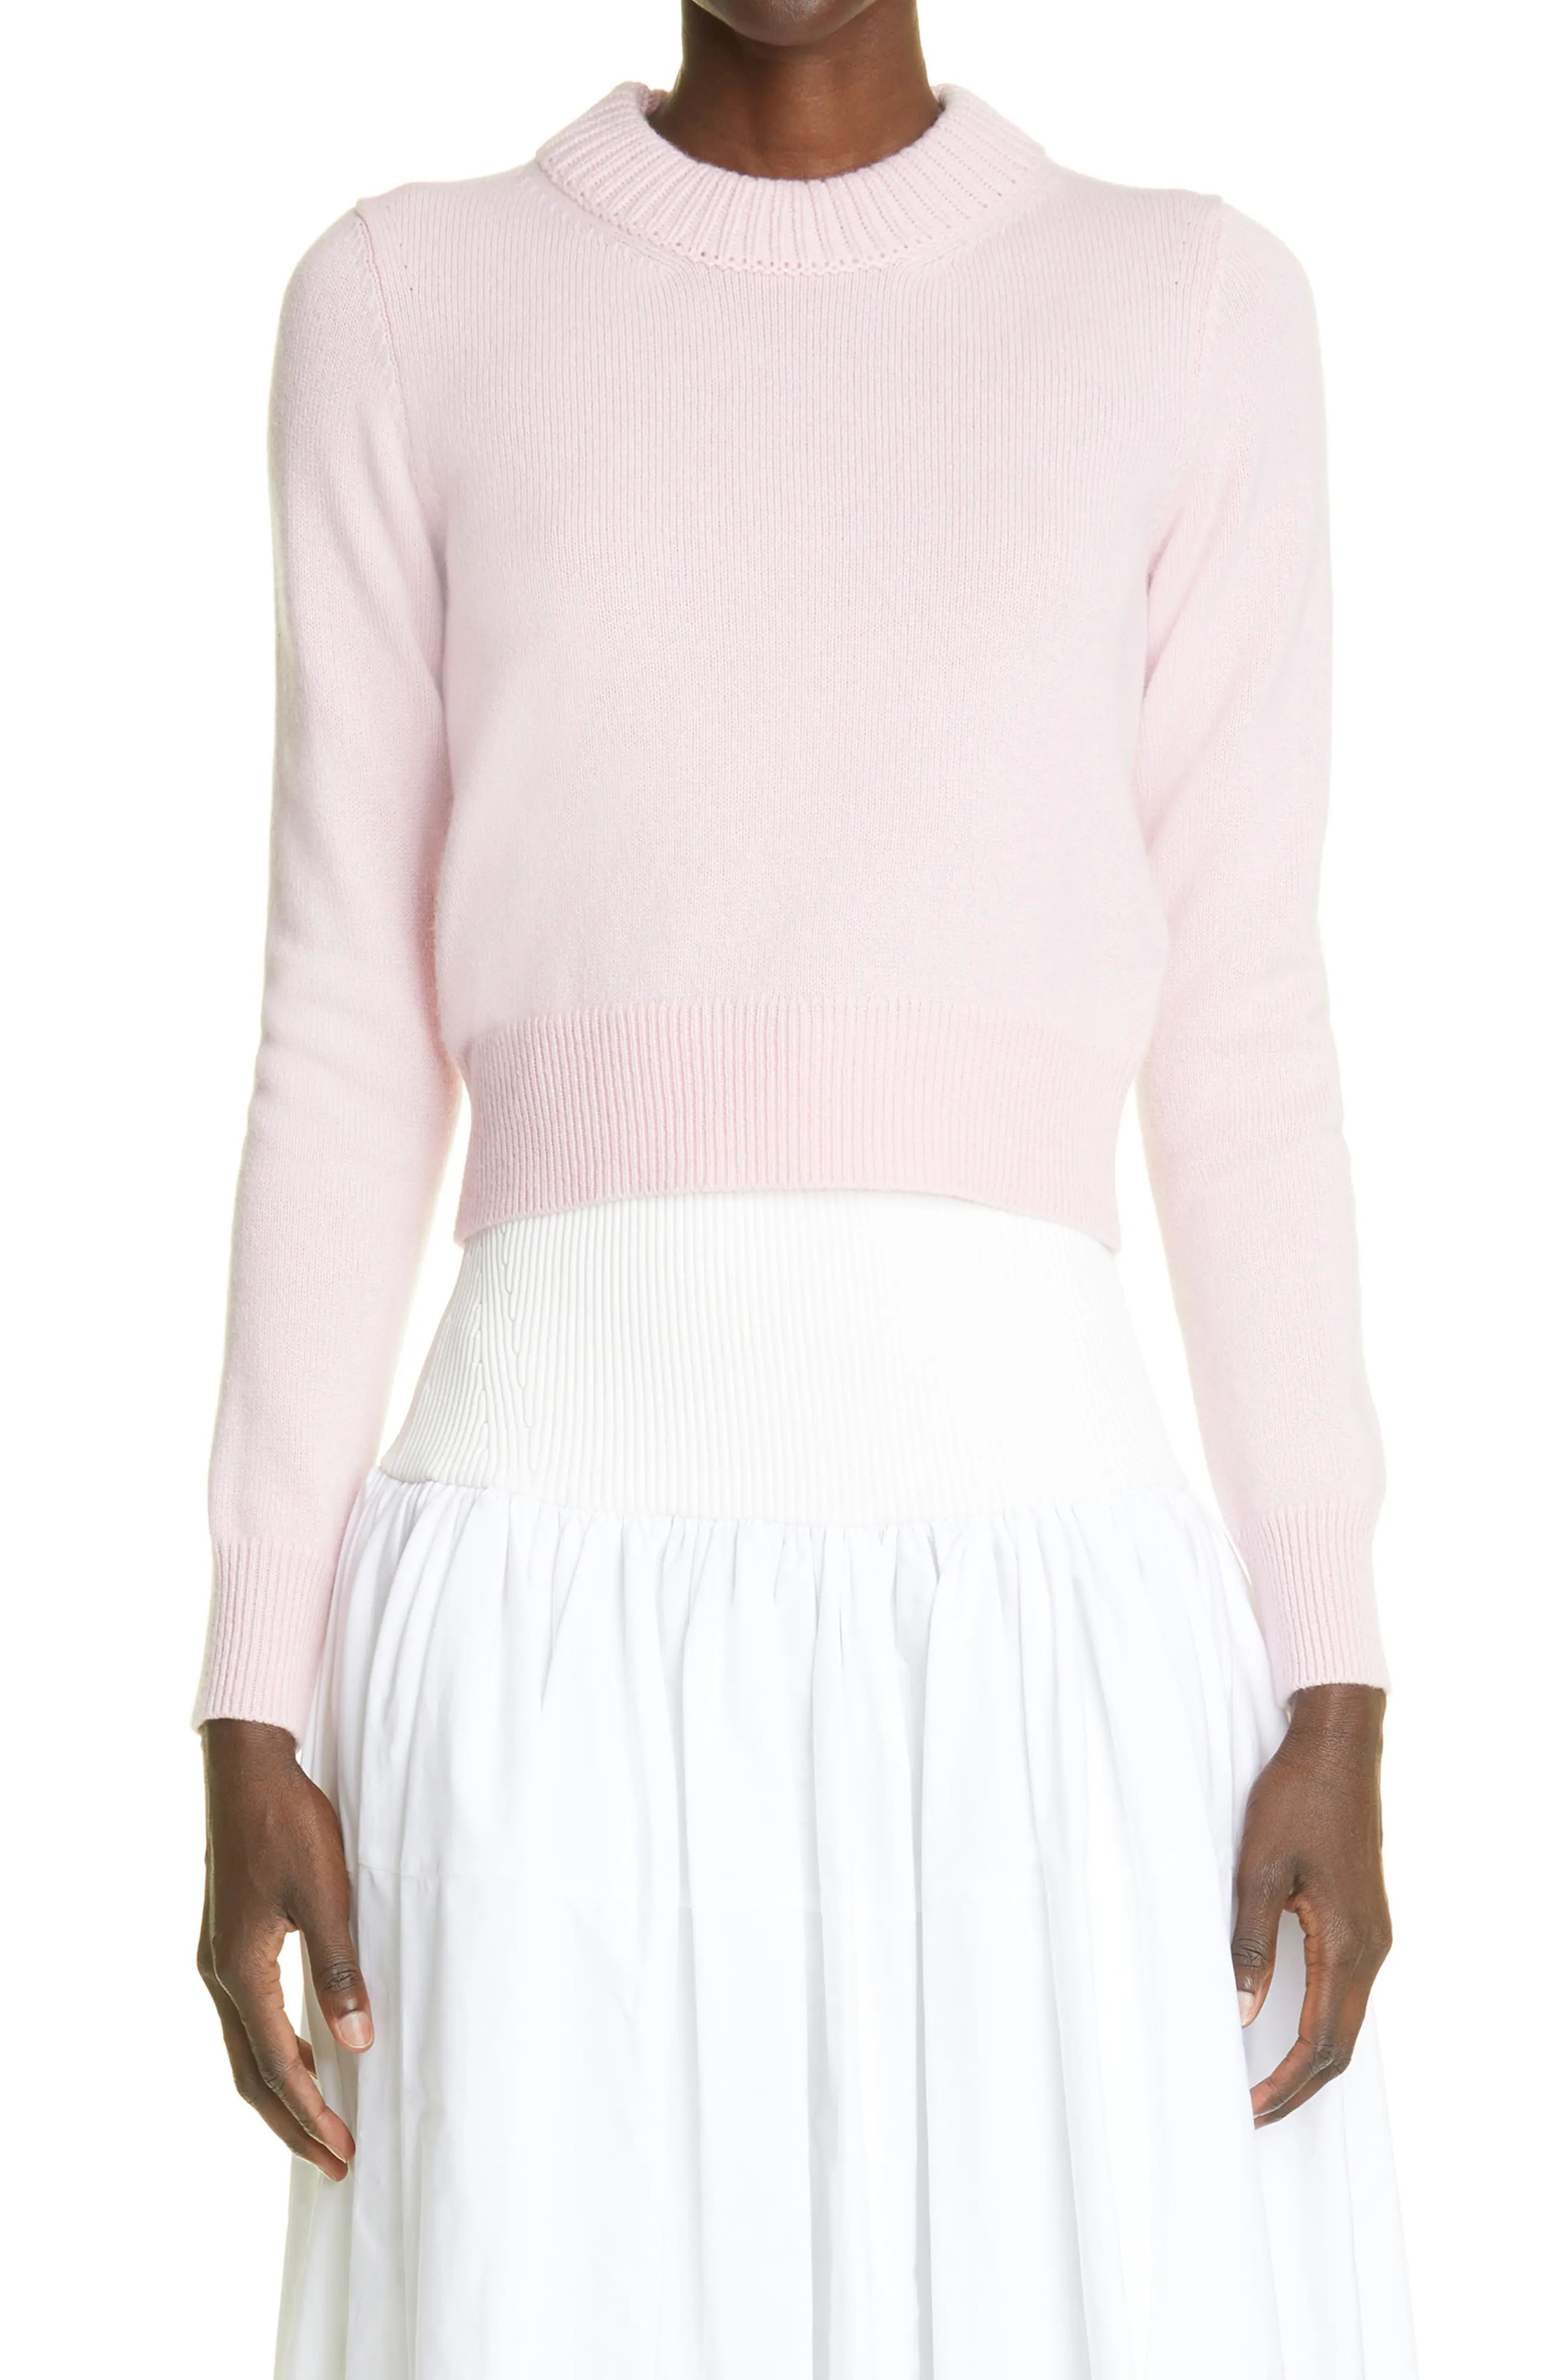 Alexander McQueen Cashmere Sweater in 5072 Ice Pink at Nordstrom, Size Large | Nordstrom